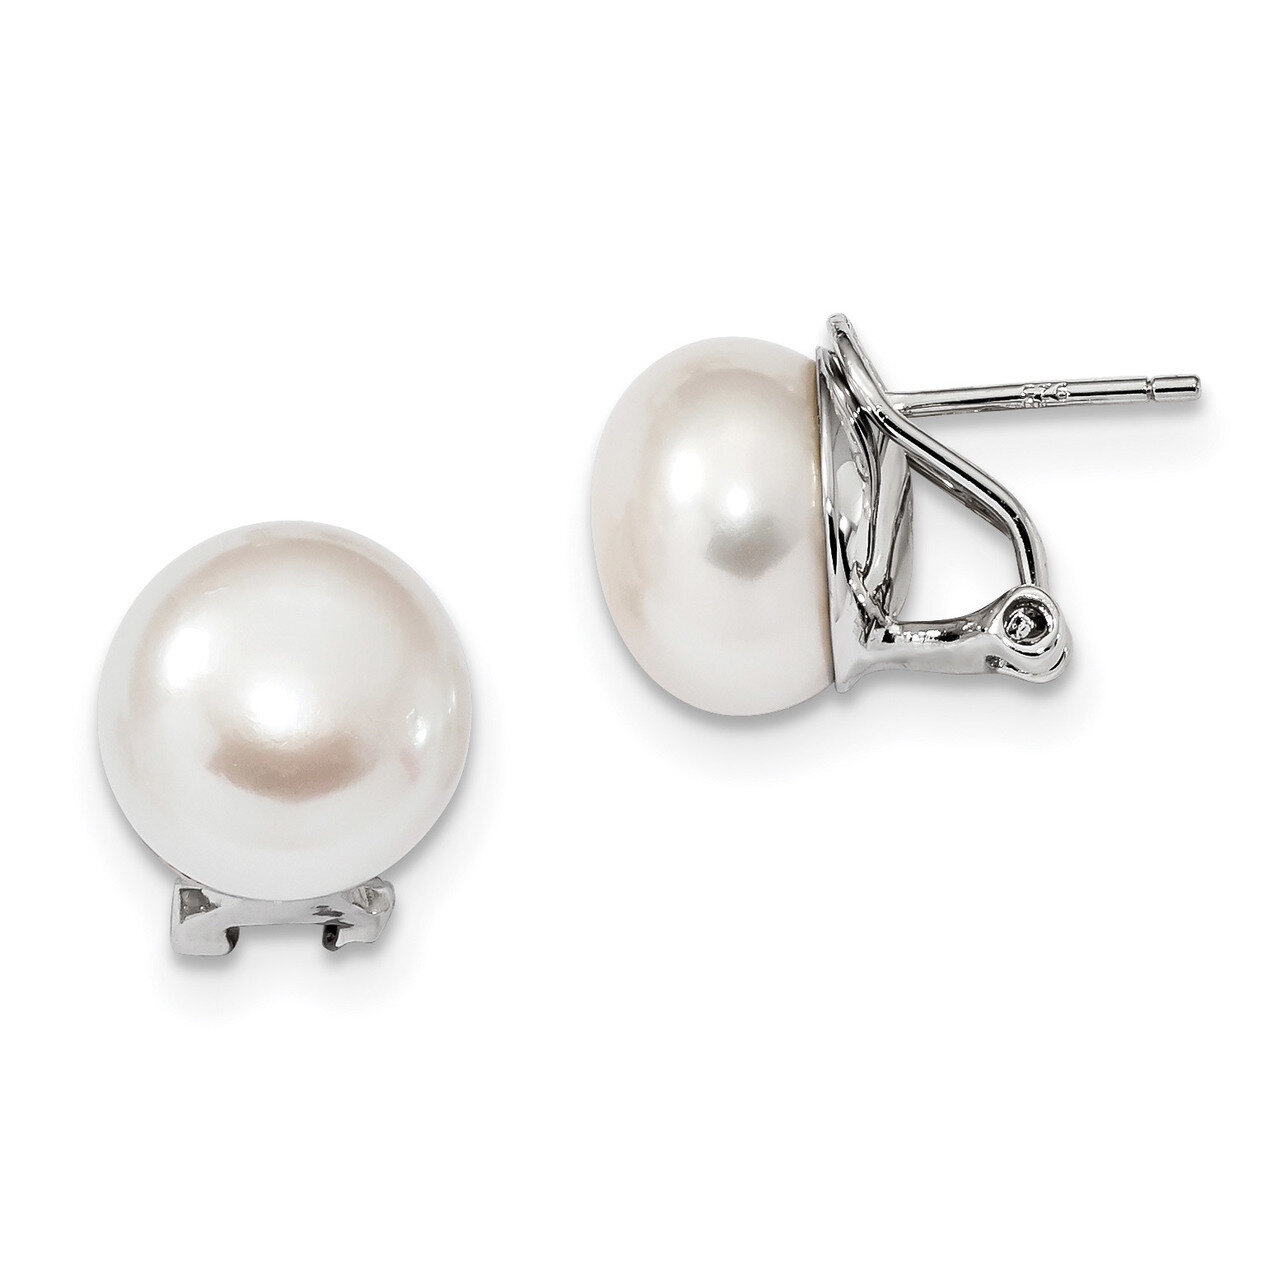 12-13mm White Cultured Freshwater Pearl Omega Back Earrings Sterling Silver Rhodium-plated QE13888